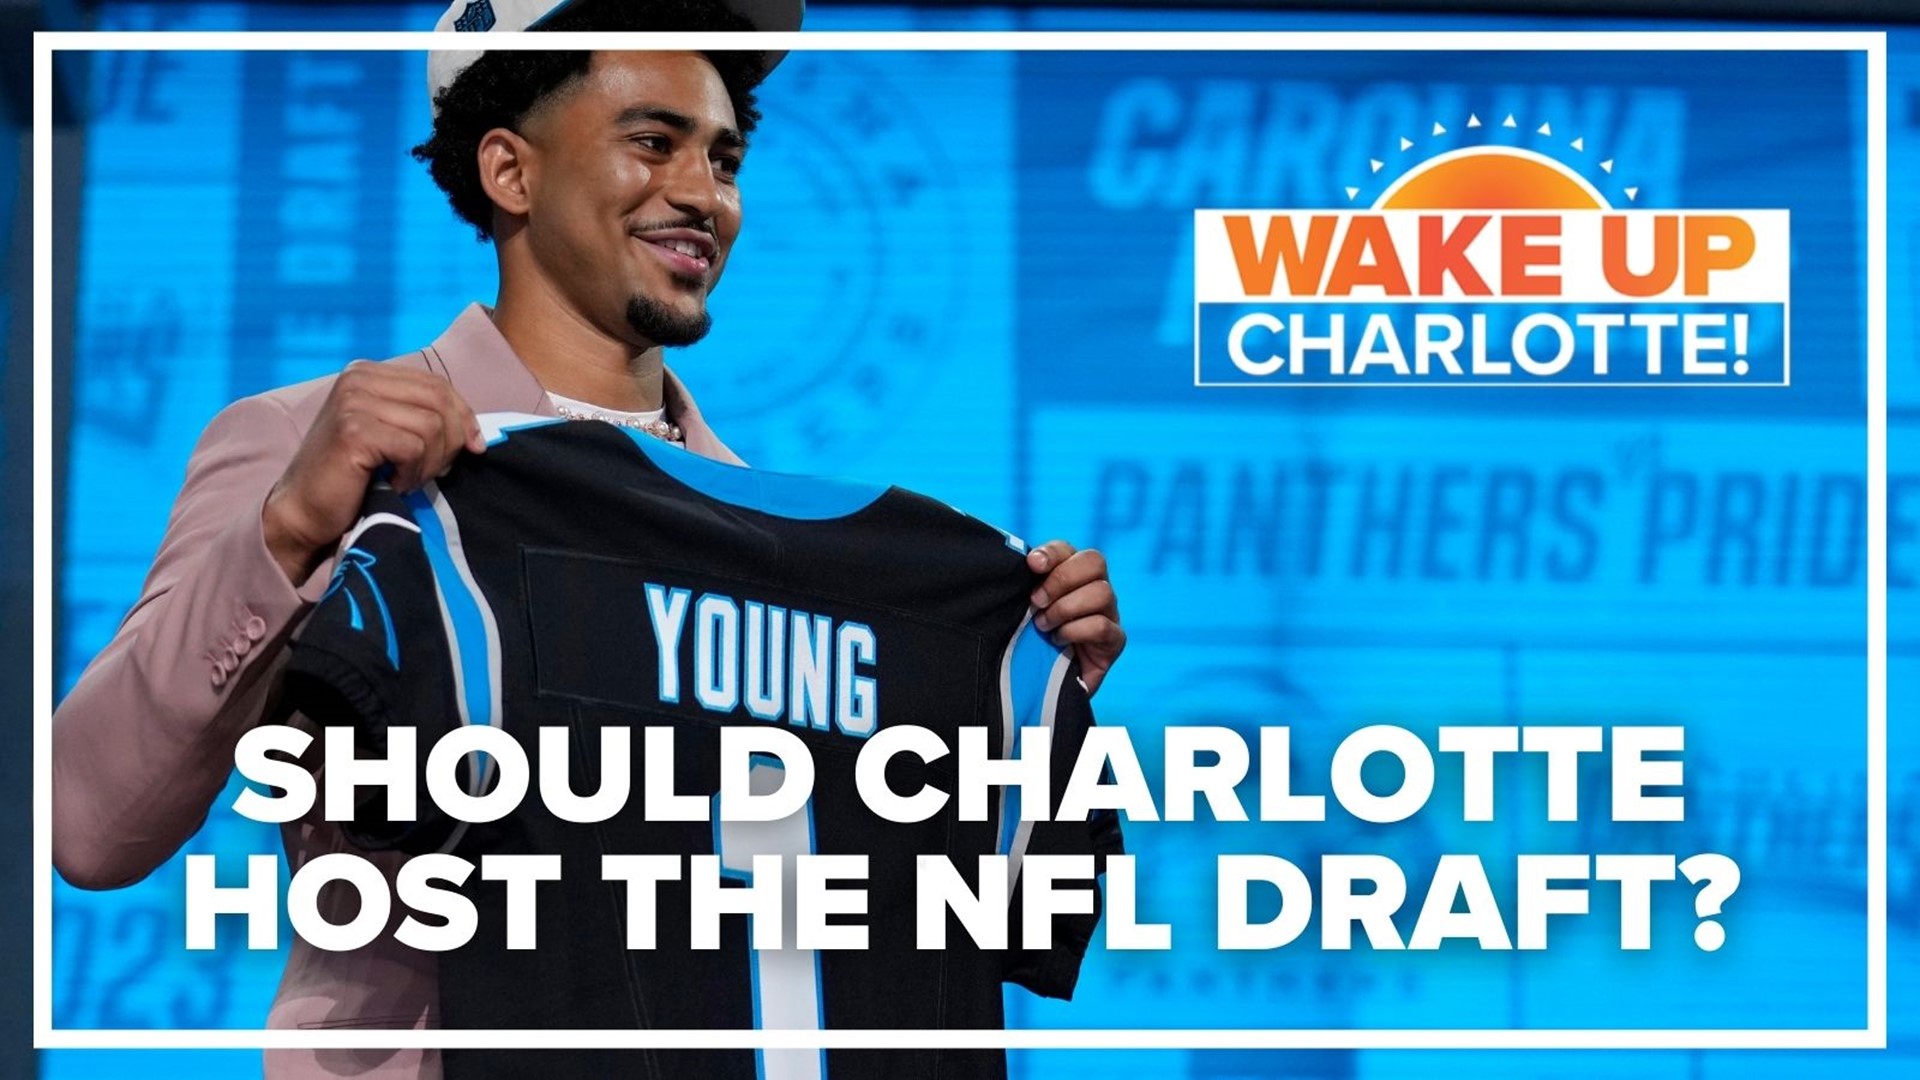 Charlotte officials recently met with NFL executives about hosting the NFL draft. Should Charlotte bring the NFL Draft to Uptown?